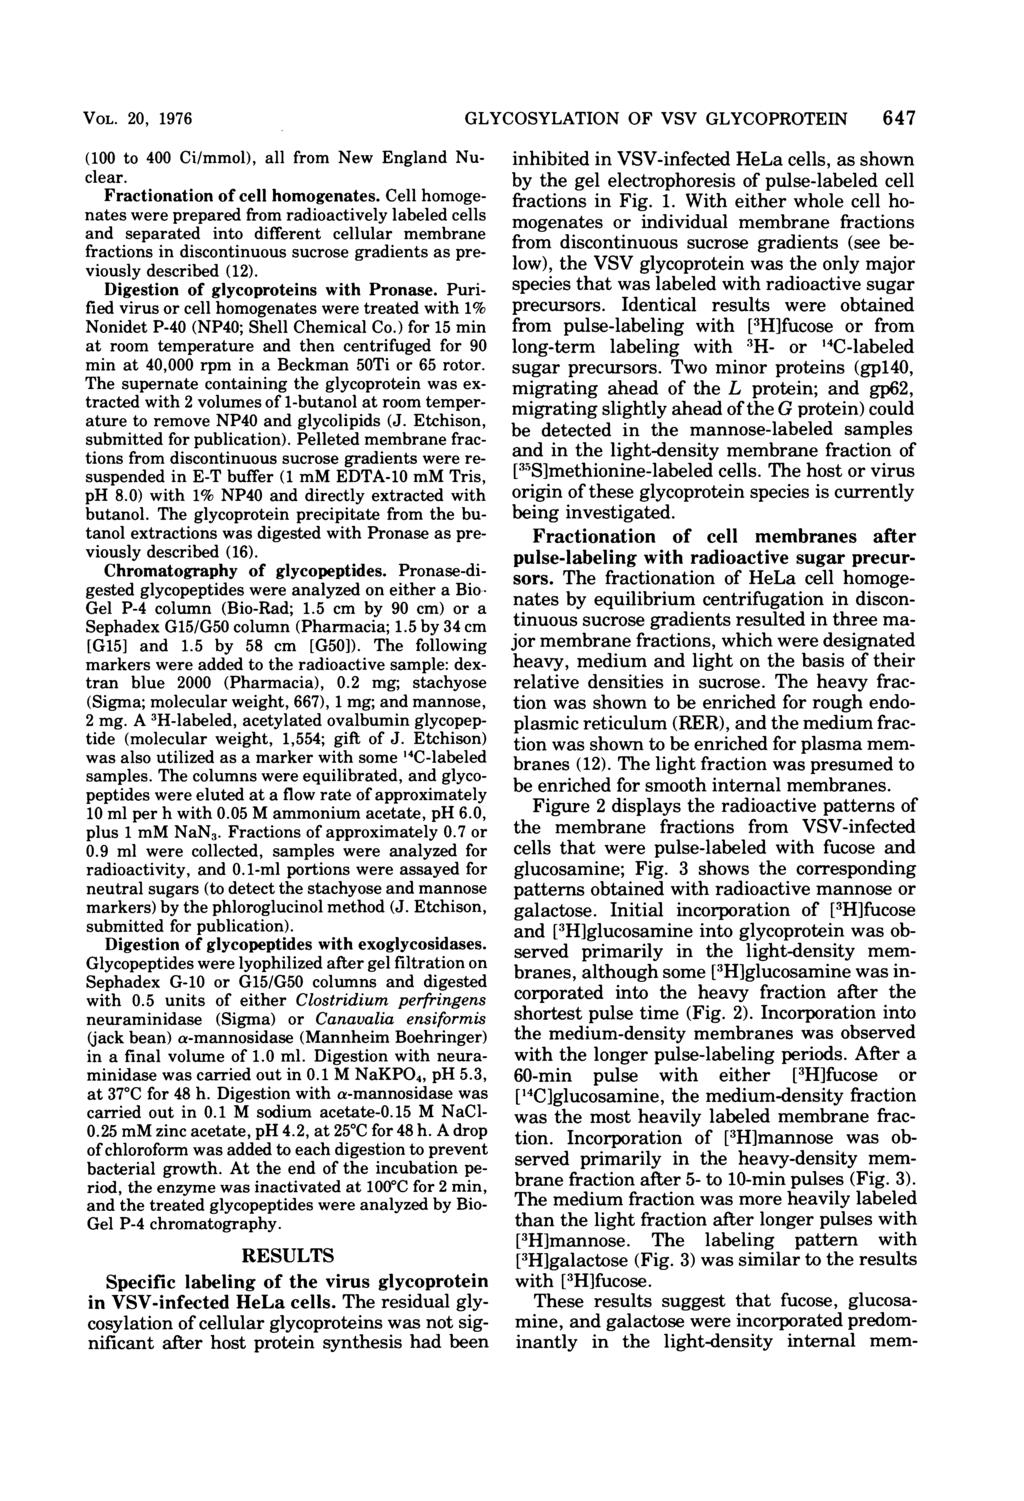 VOL. 20, 1976 (100 to 400 Ci/mmol), all from New England Nuclear. Fractionation of cell homogenates.